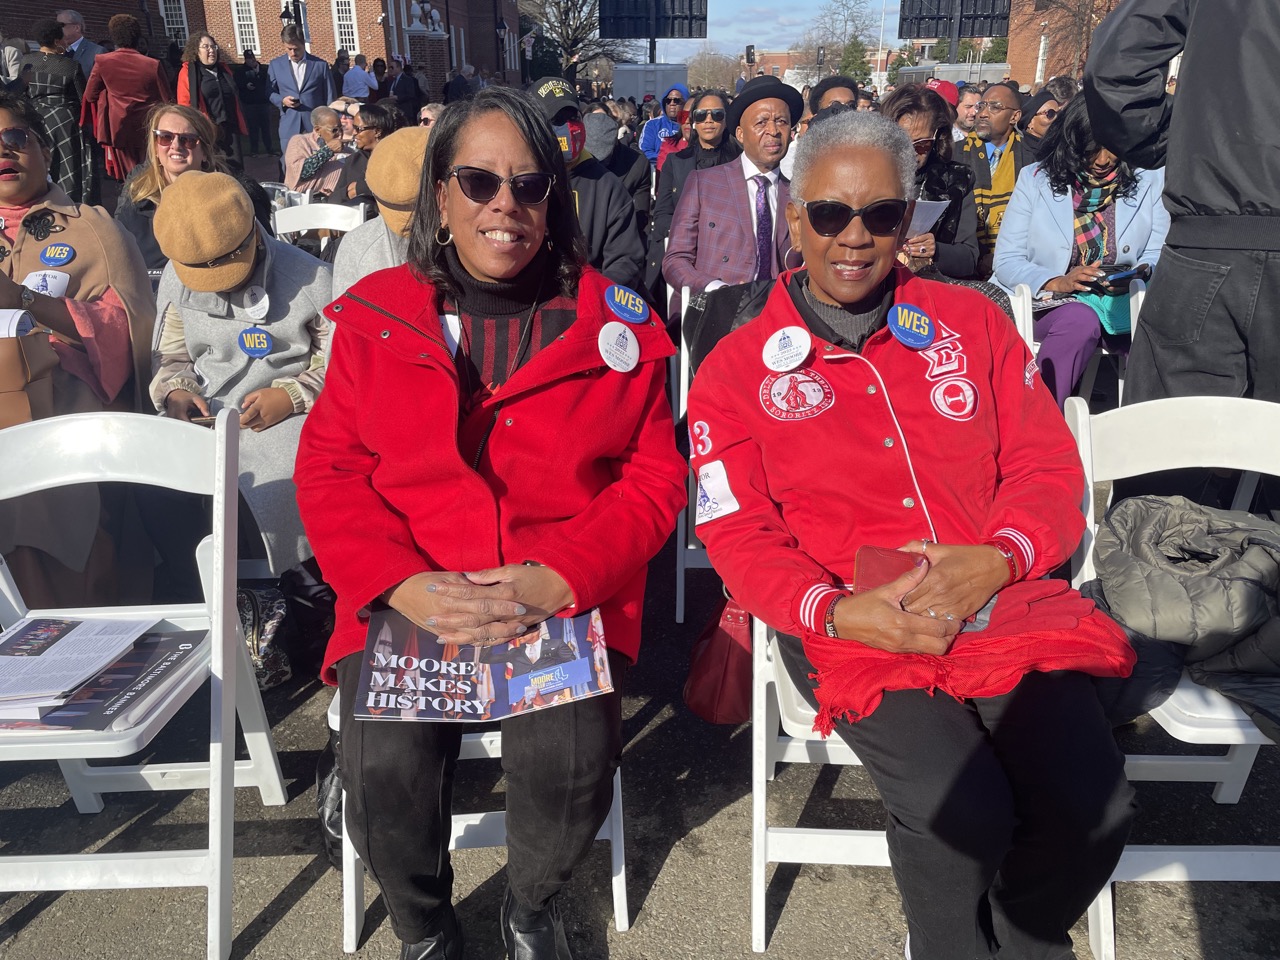 Delta Sigma Theta members Elora Cyrus of Silver Spring and Debroah Wilder of Largo arrive clad in their sorority colors to support new Maryland governor Wes Moore.